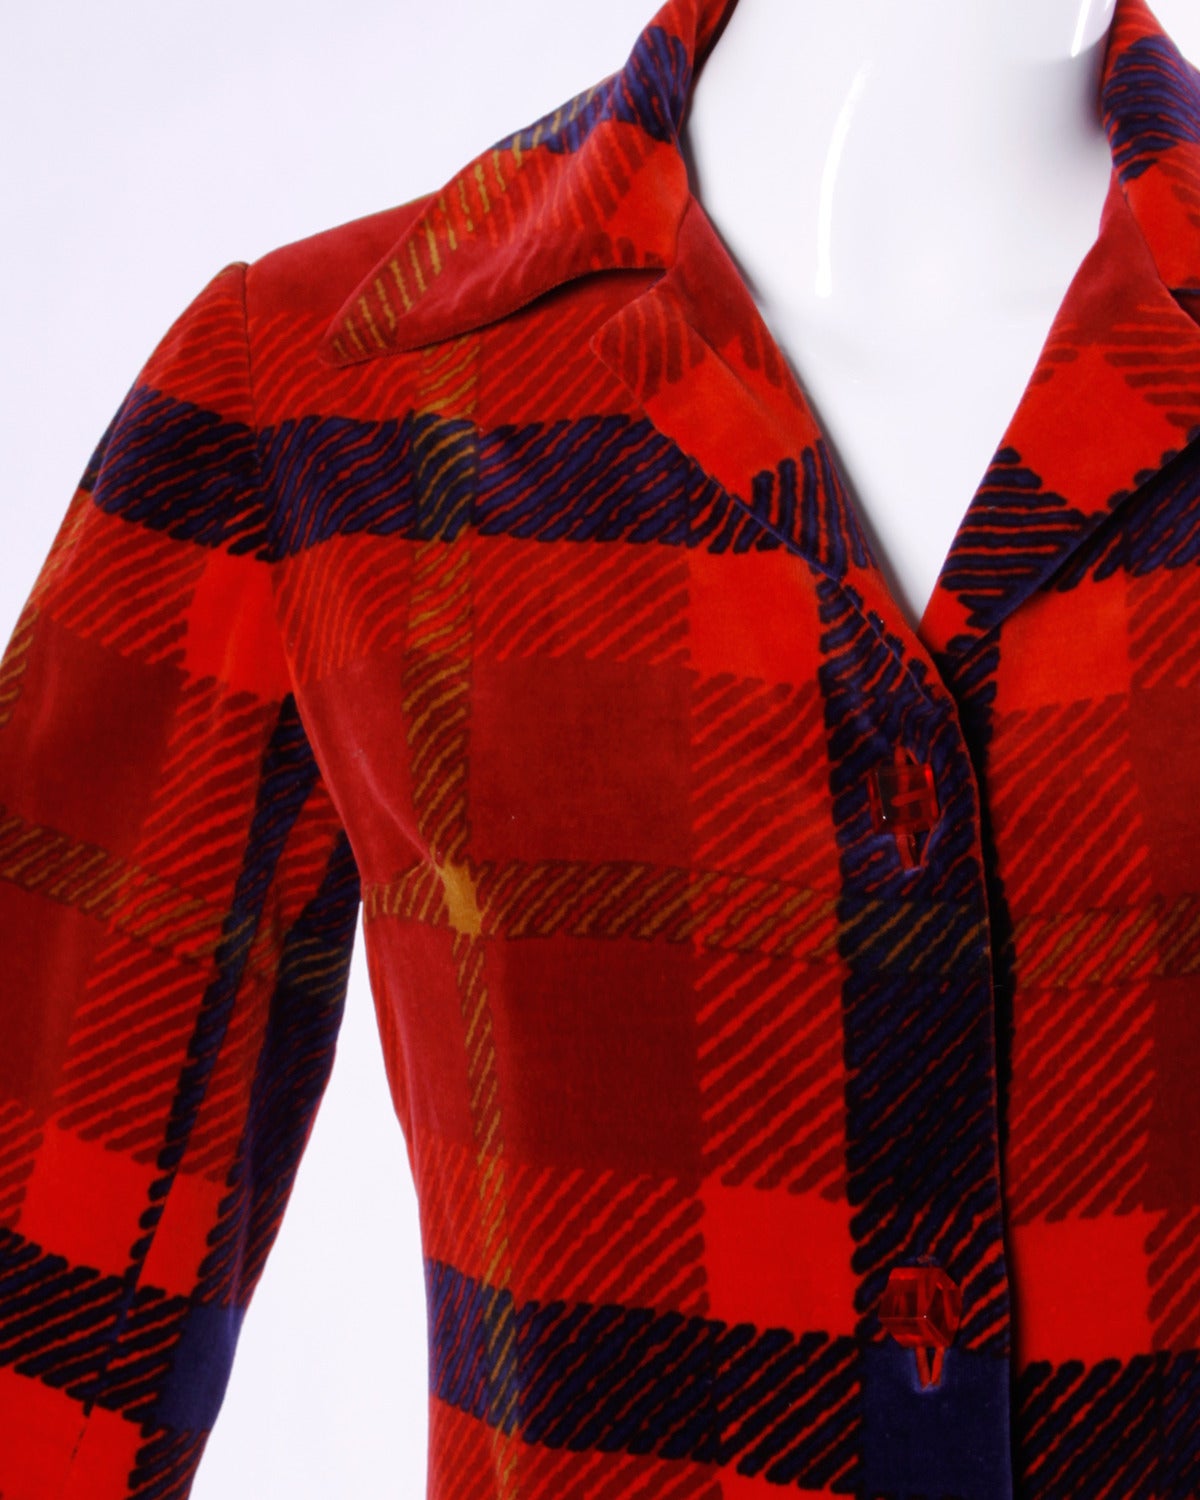 Darling vintage plaid velvet coat by Bill Blass for Saks 5th Avenue. Amazing red lucite cube buttons!

Details:

Fully Lined
Side Pockets
Front Button Closure
Estimated Size: Small- Medium
Color: Red/ Blue/ Purple
Fabric: Velvet
Label: